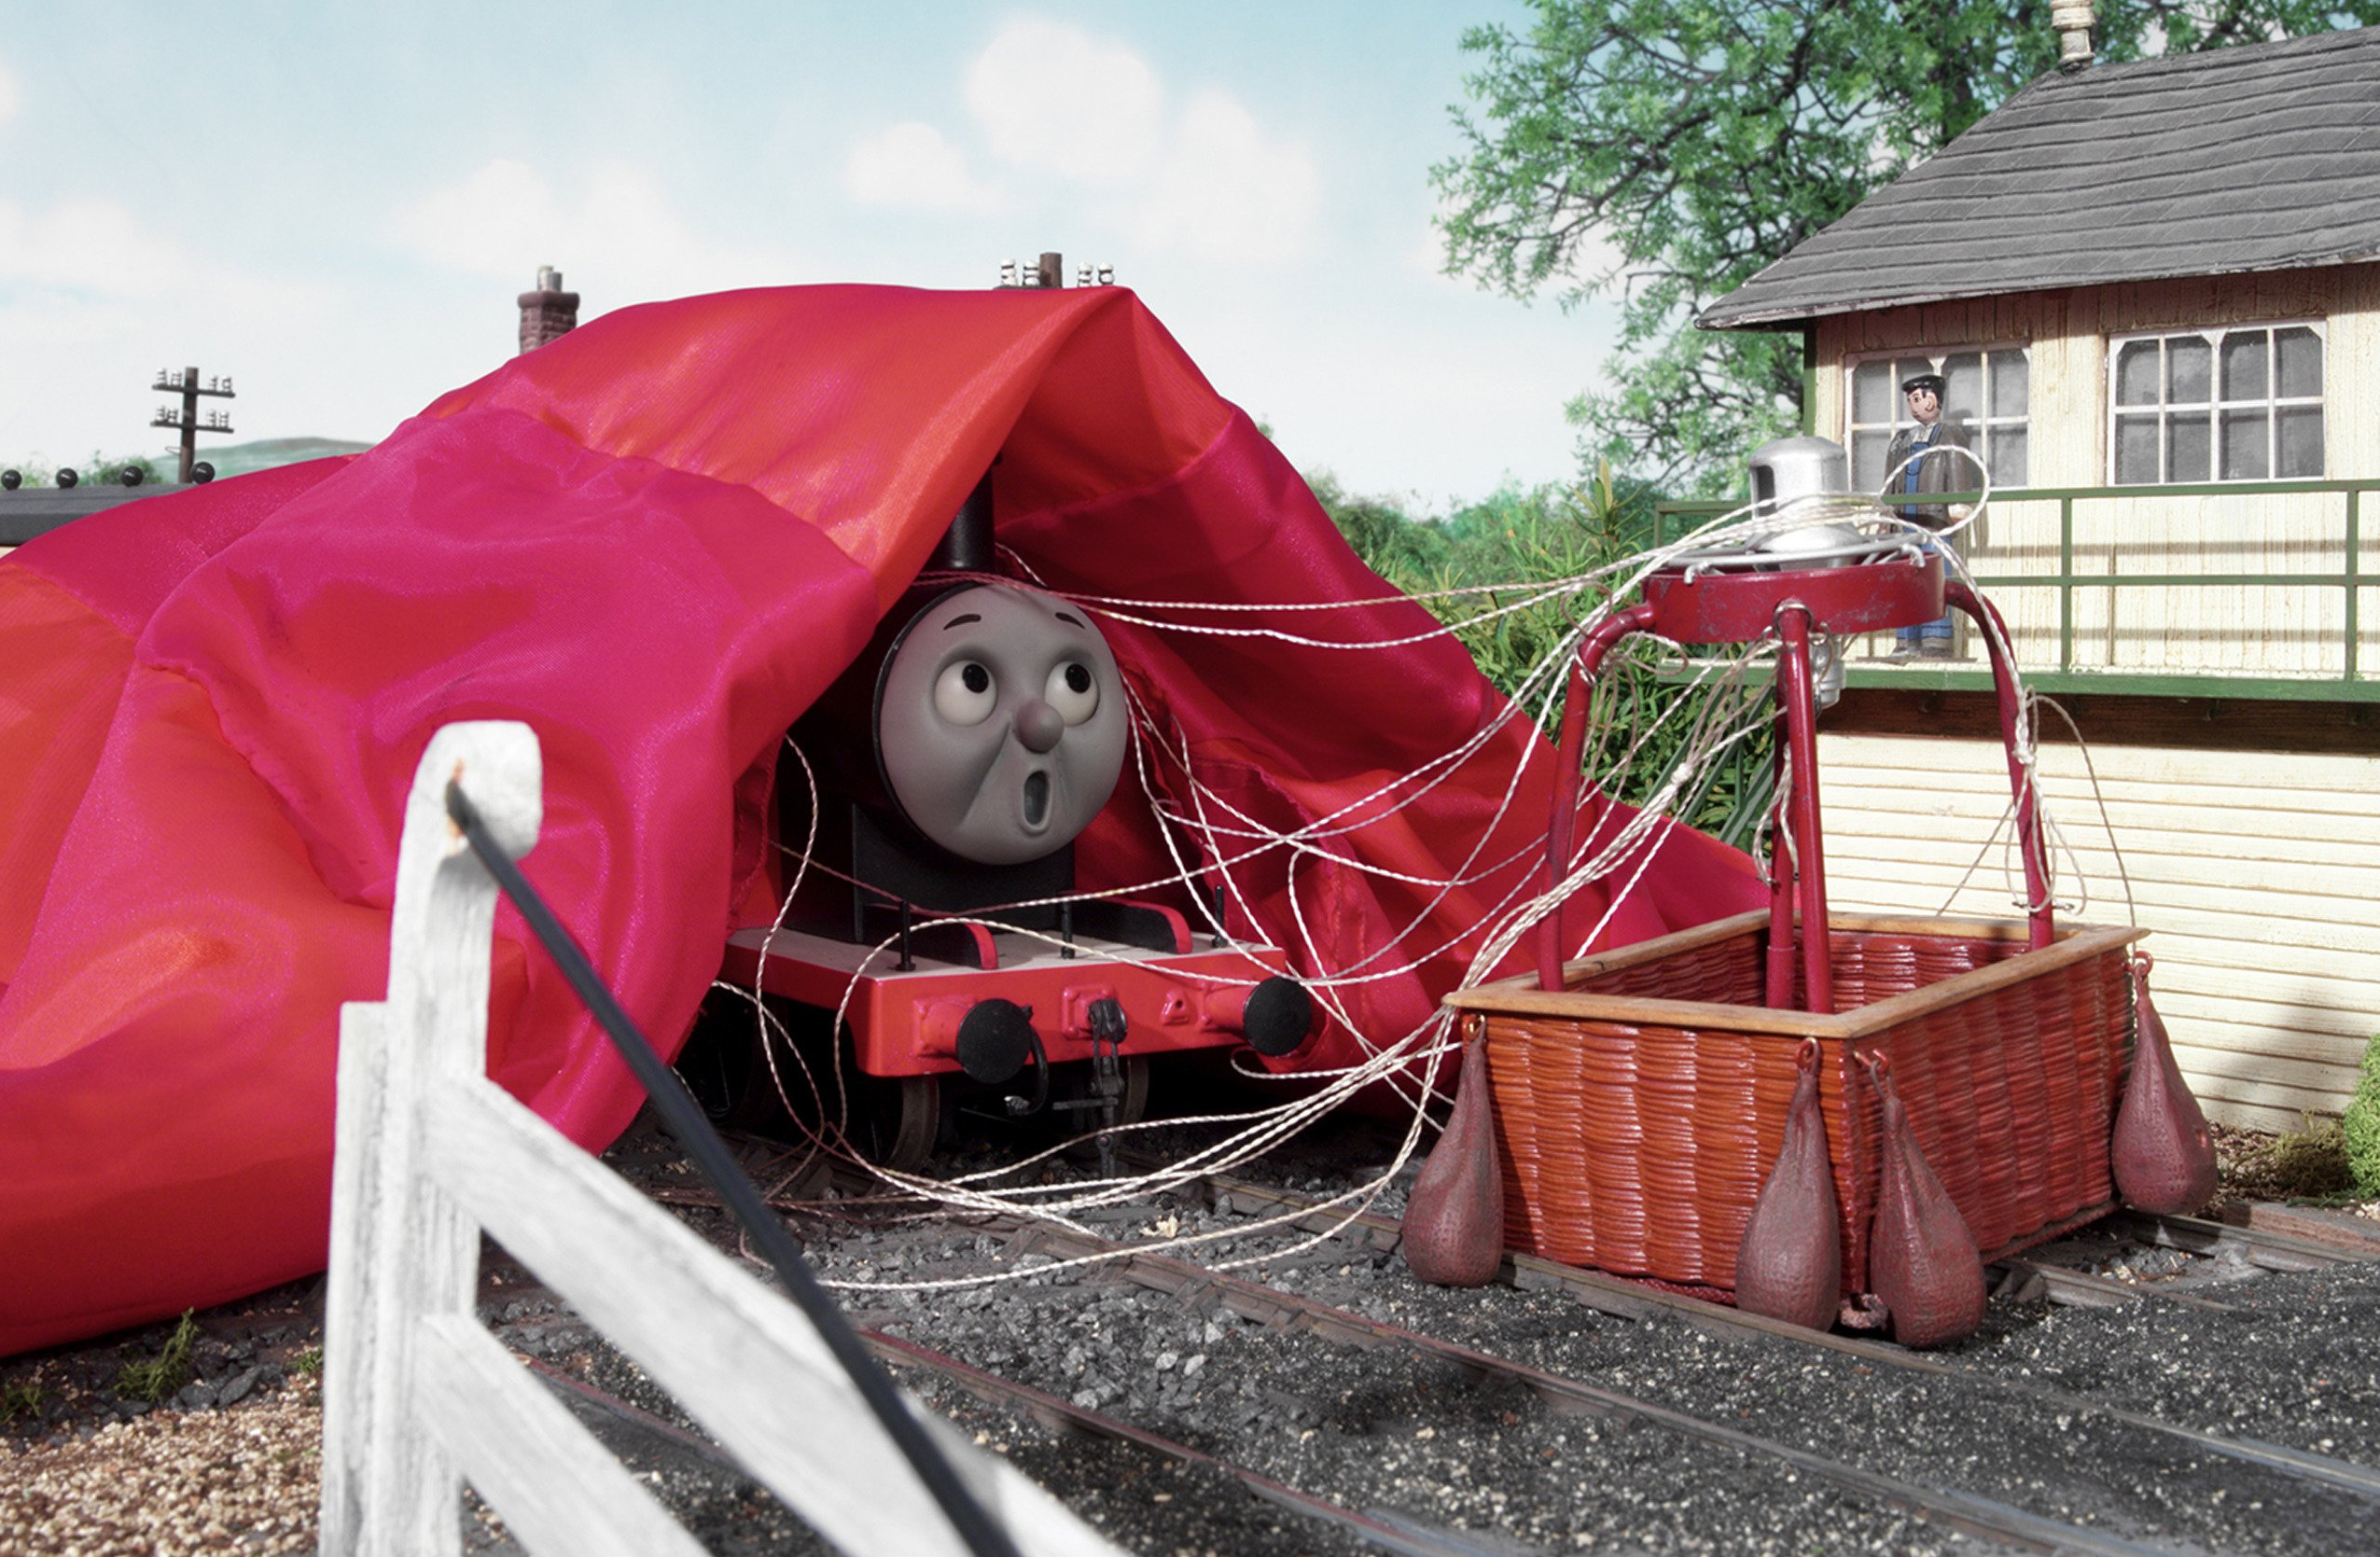 James and the Red Balloon | Thomas the Tank Engine Wiki | Fandom